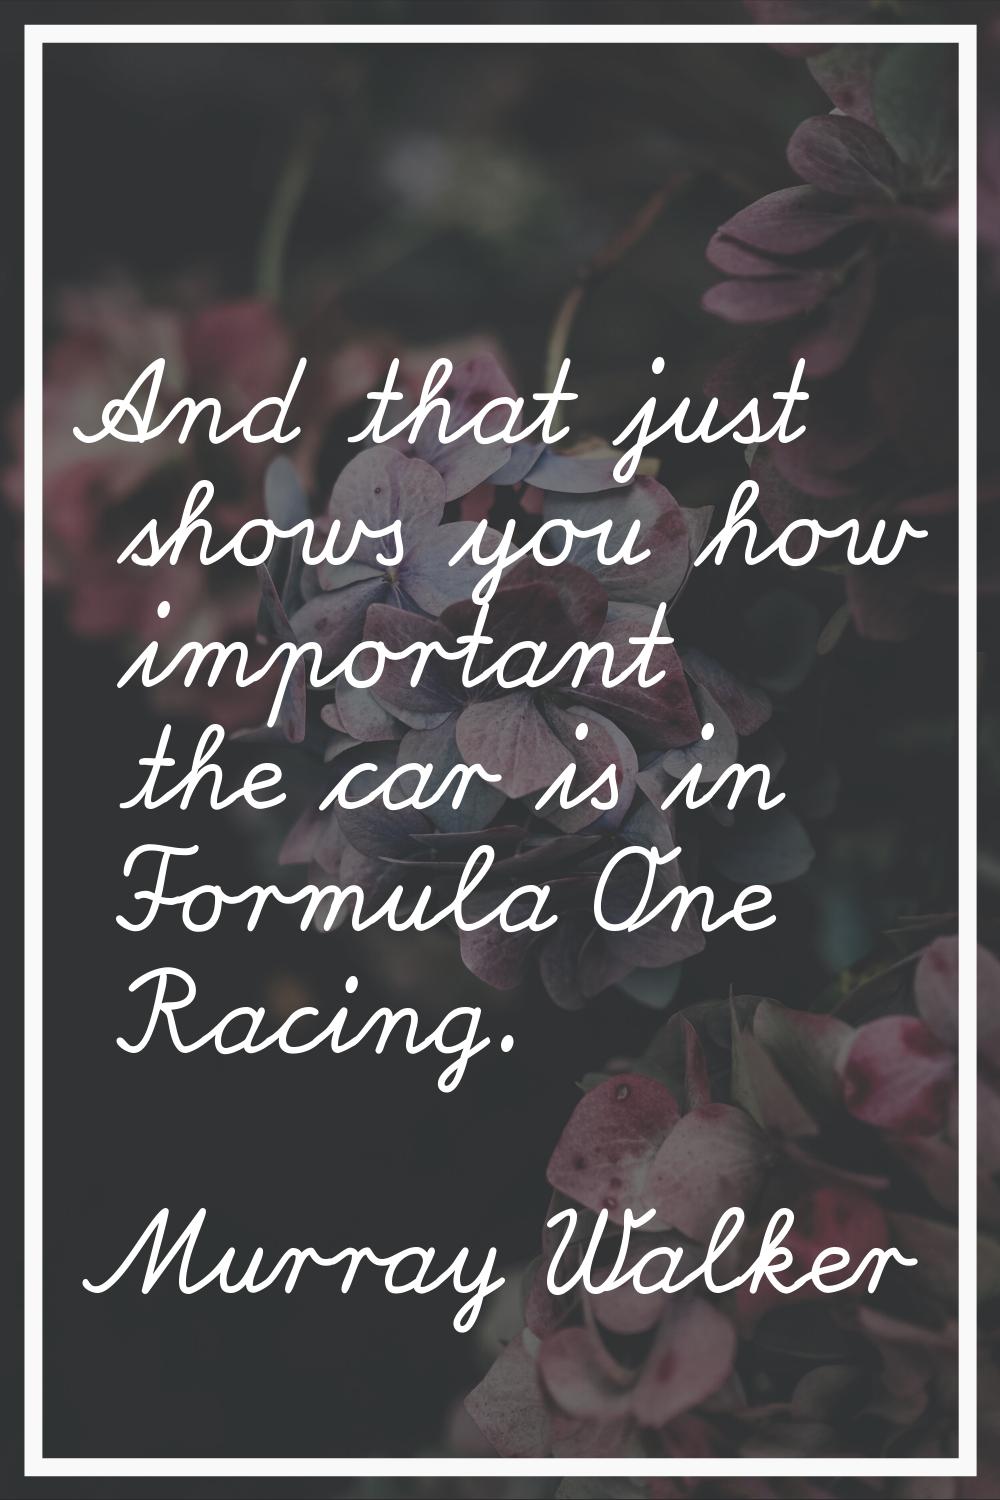 And that just shows you how important the car is in Formula One Racing.